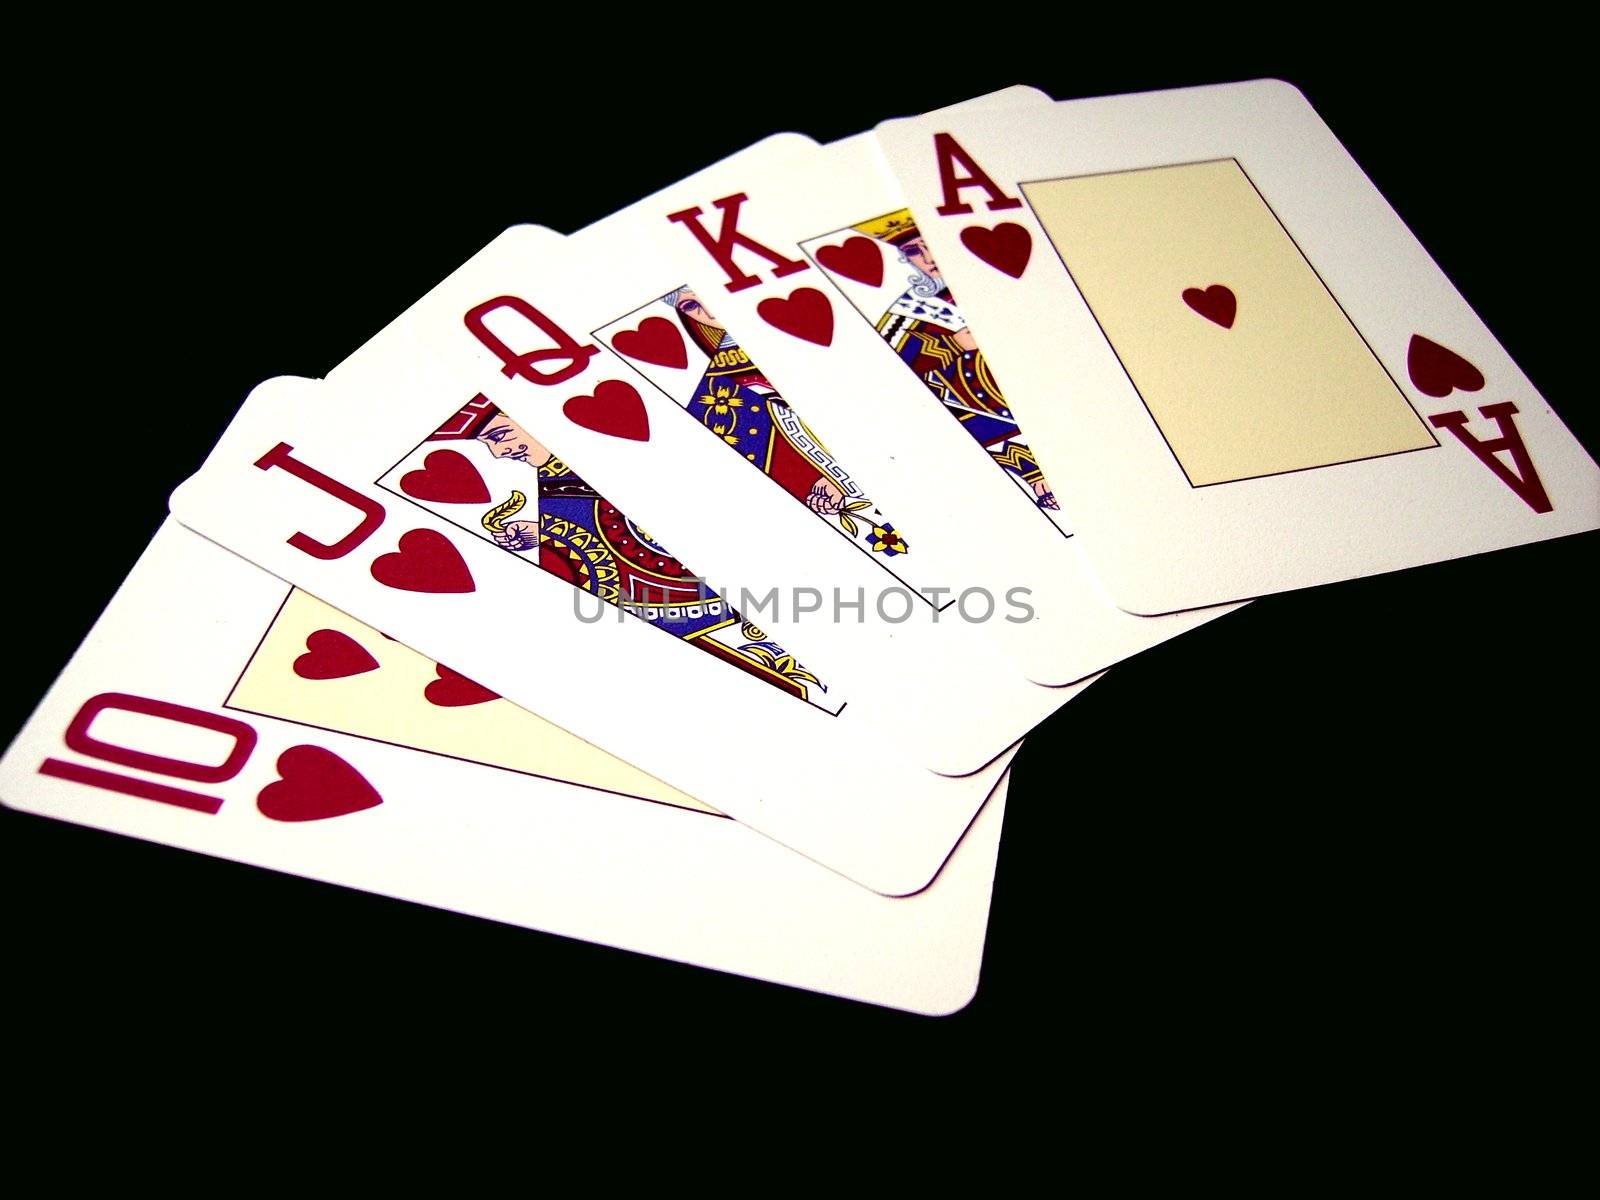 an image with a royal flush on black background